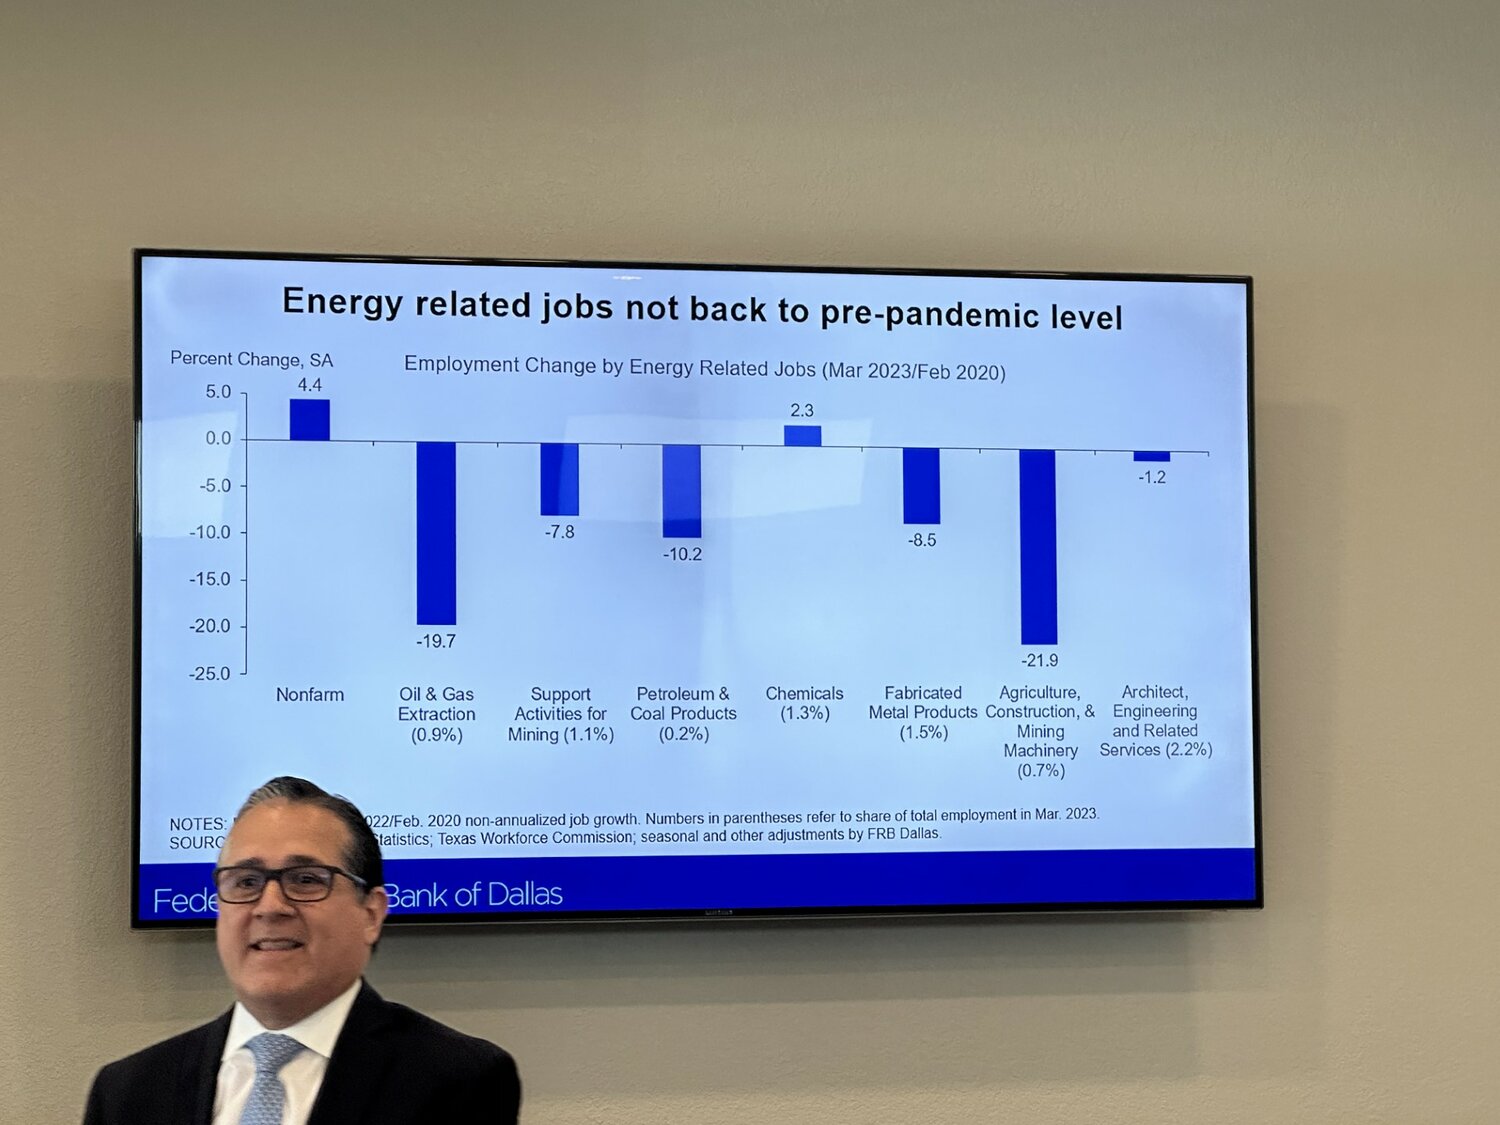 Luis B. Torres, a senior business economist in the research department of the Federal Reserve Bank of Dallas, gave a presentation at a Ma 18 economic forecast session sponsored by the Katy Area Chamber of Commerce.